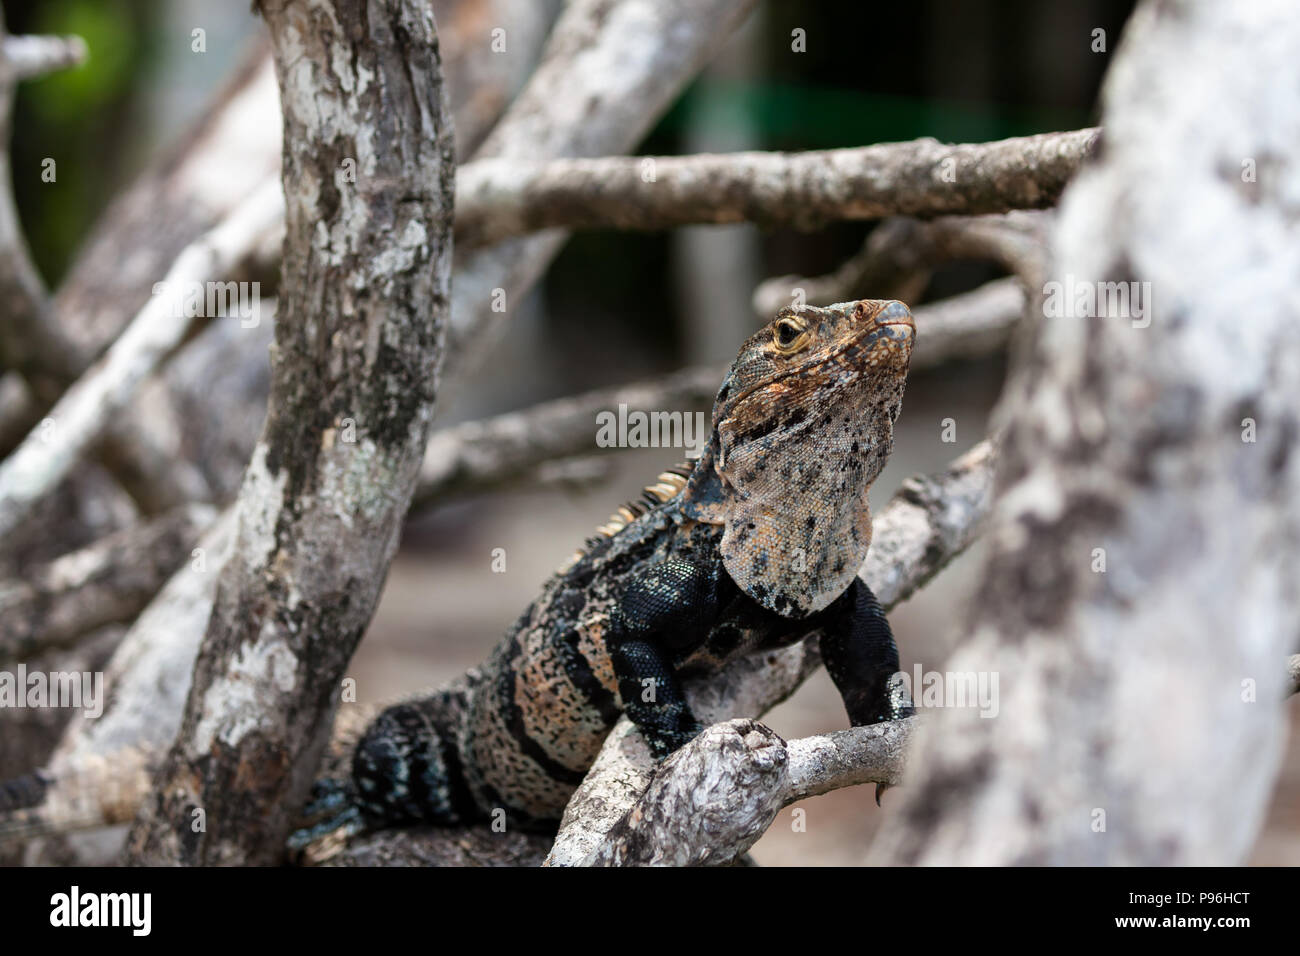 A black spiny-tailed iguana resting on a tree branch in Manuel Antonio National Park, Costa Rica. Stock Photo